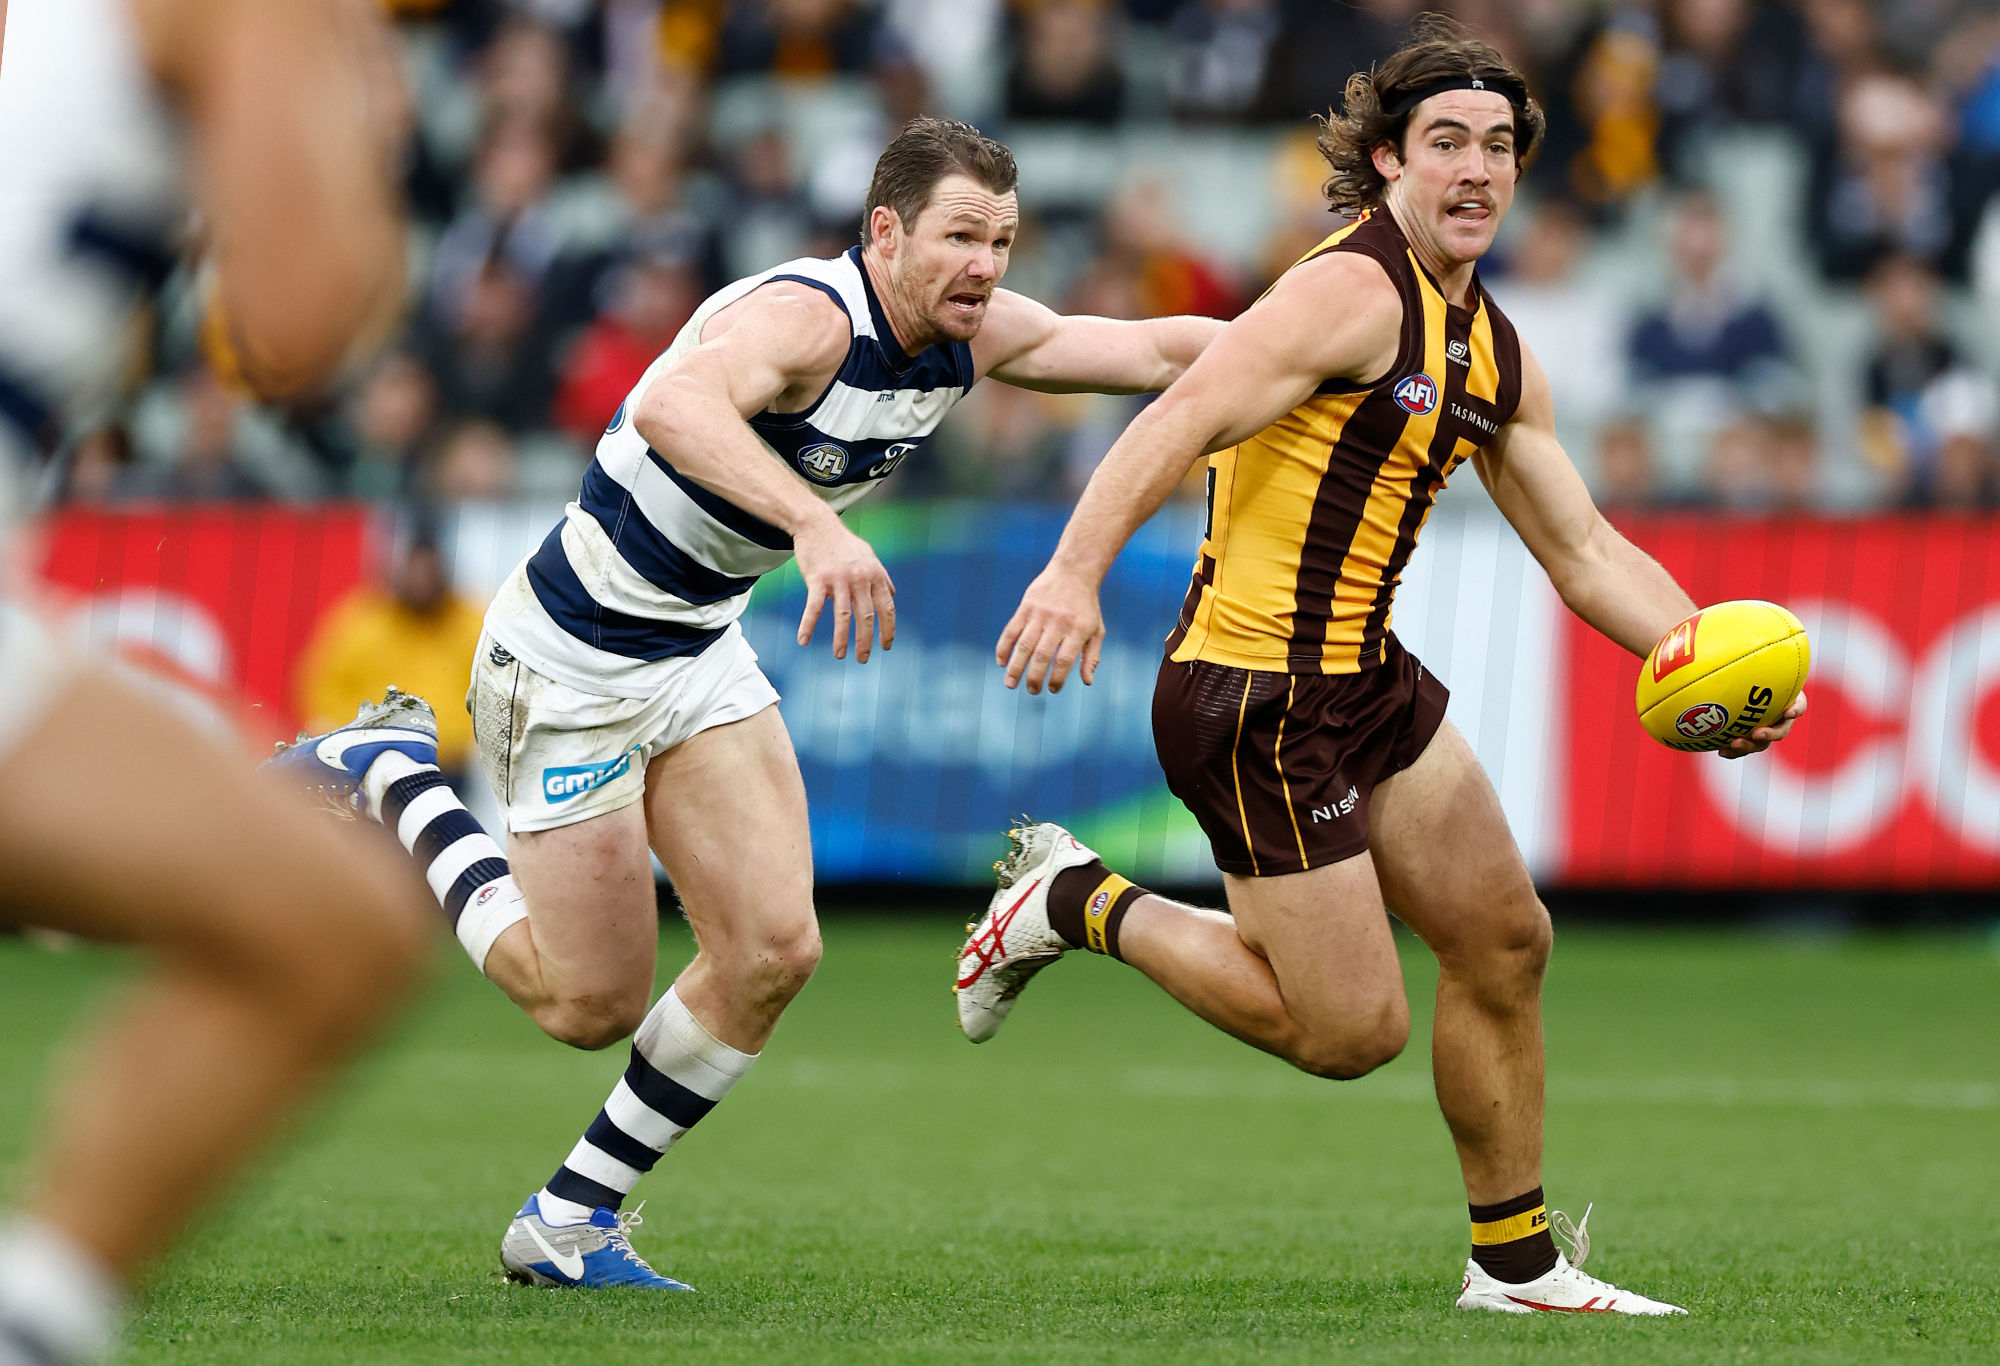 Jai Newcombe of the Hawks is tackled by Patrick Dangerfield of the Cats.